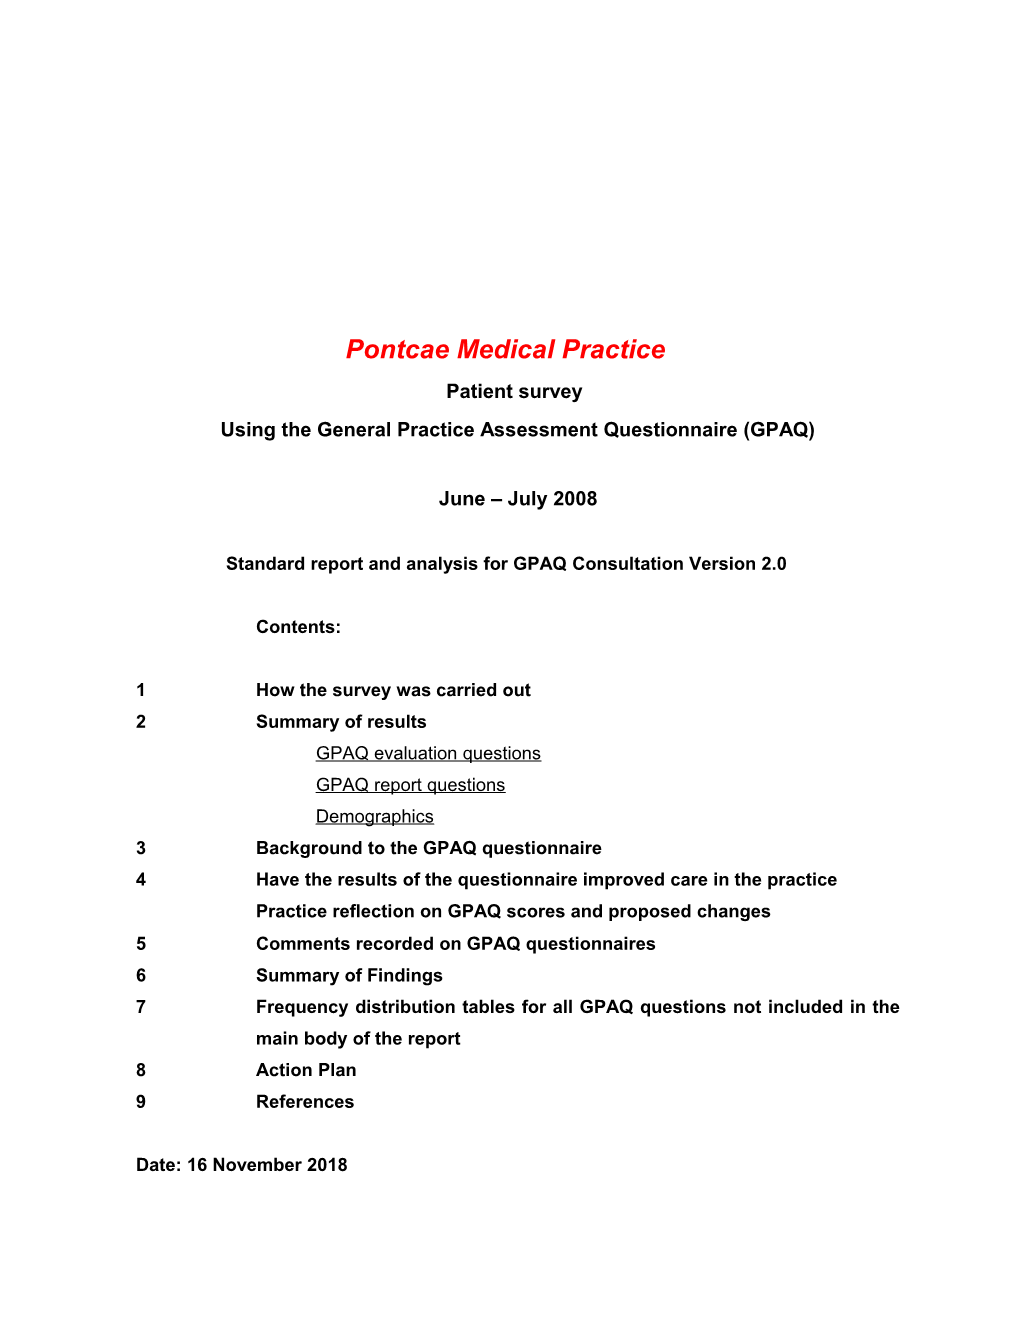 Using the General Practice Assessment Questionnaire (GPAQ)